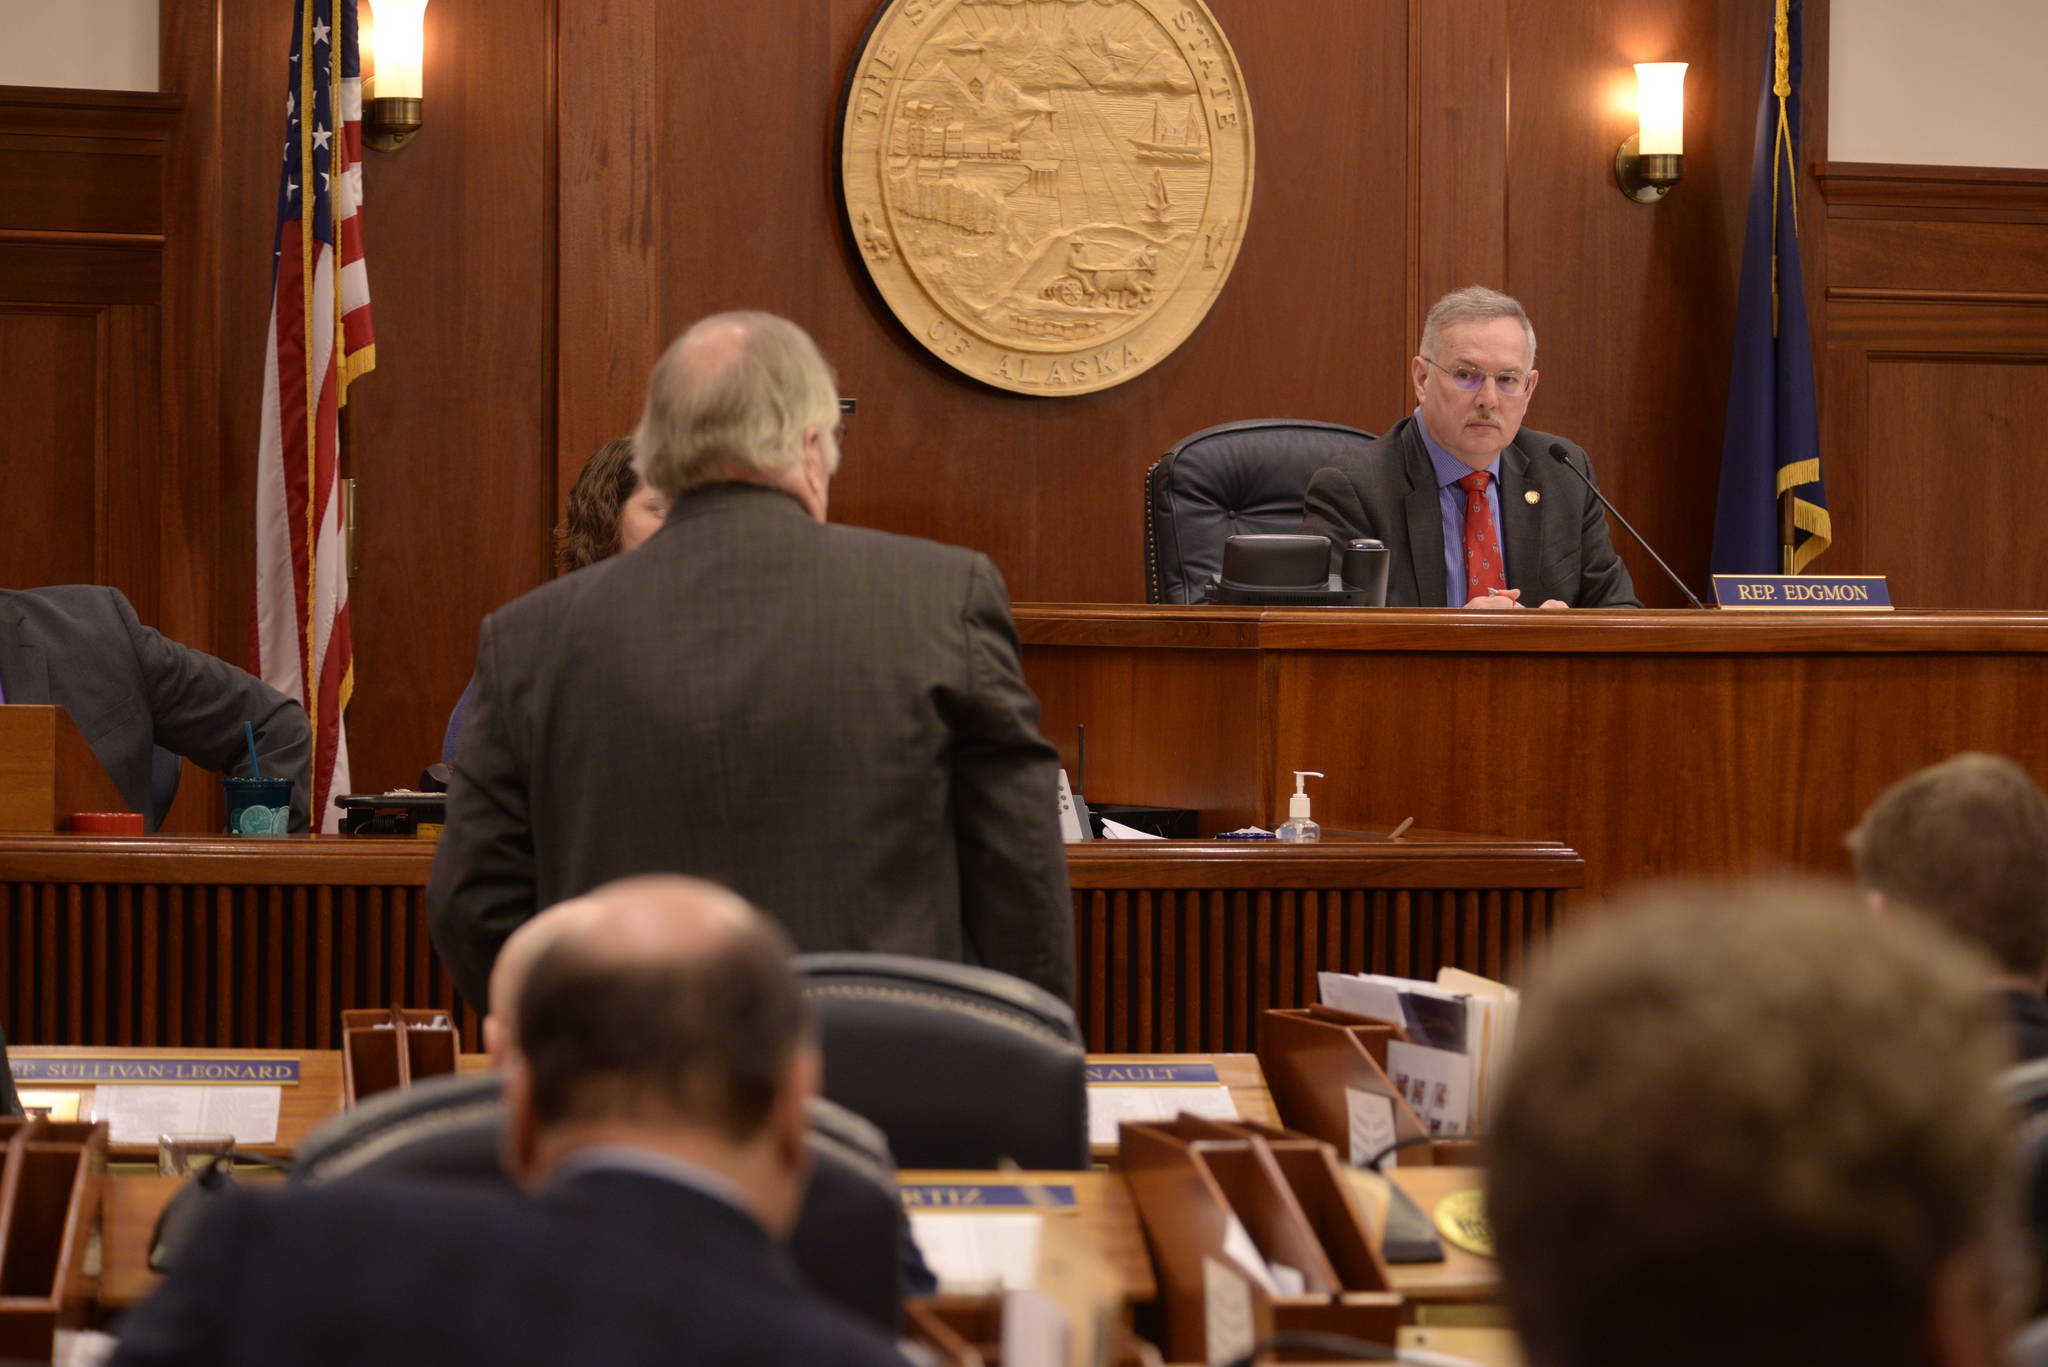 Rep. Mike Chenault, R-Nikiski, presents House Concurrent Resolution 10 to Speaker of the House Bryce Edgmon, D-Dillingham on Monday, March 19, 2018 in the Alaska State Capitol. (Brian Hild | Alaska House Majority)